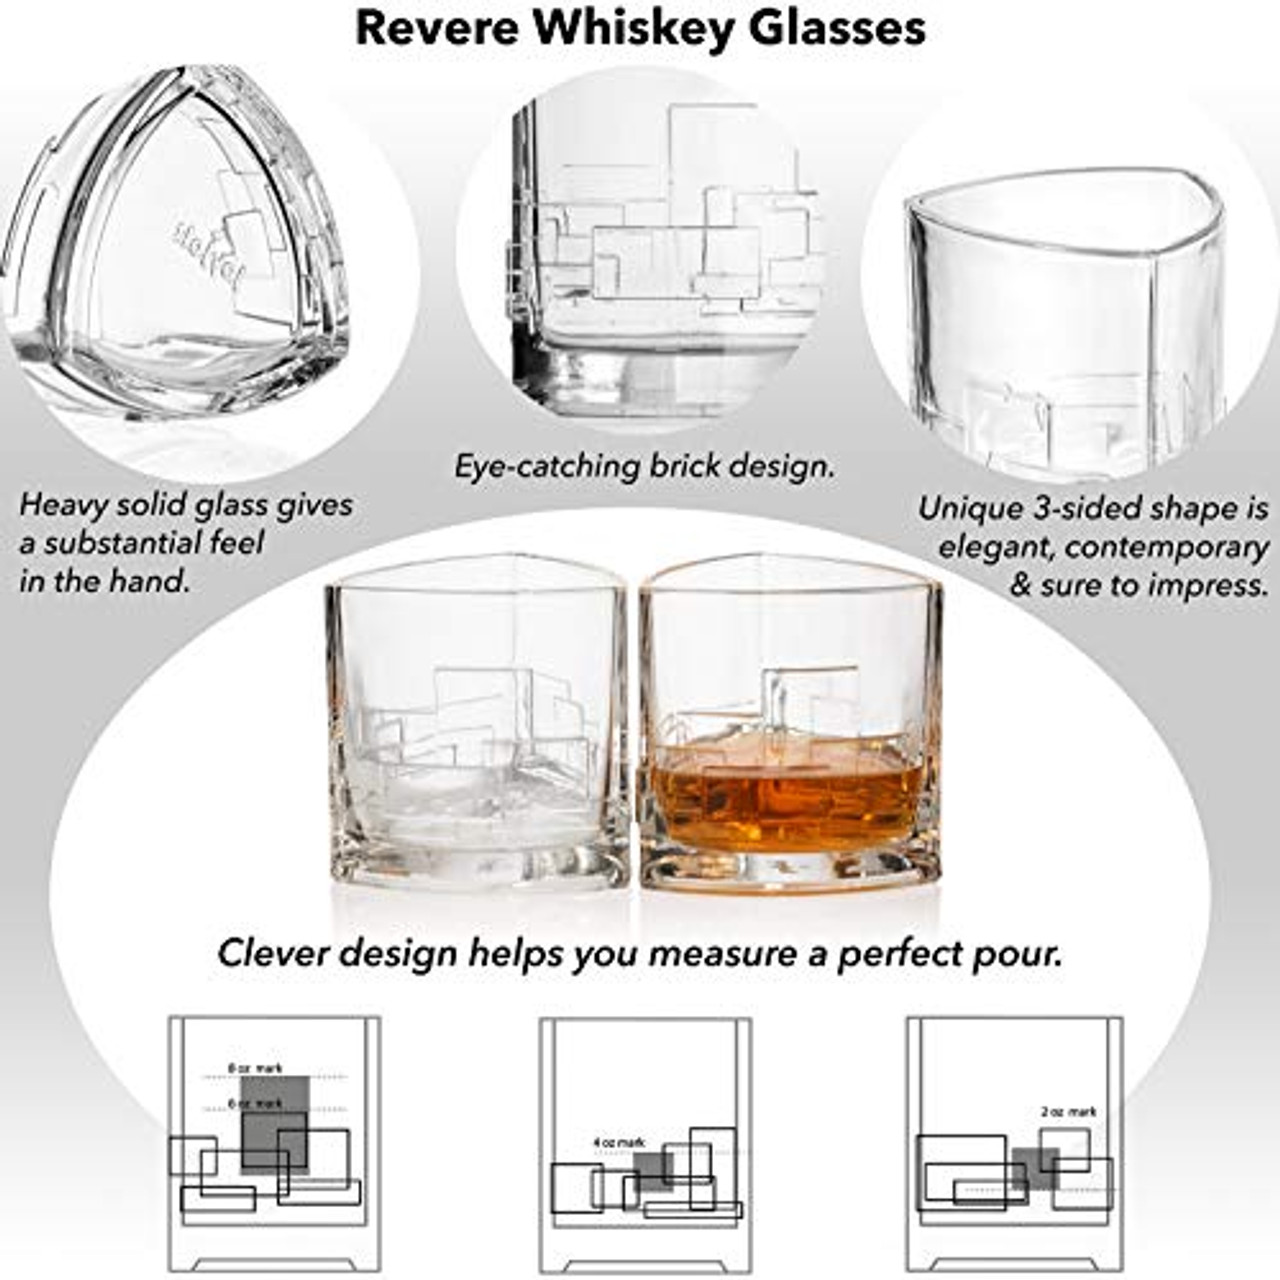 The 10 Best Old Fashioned Glasses, According to Whiskey Experts